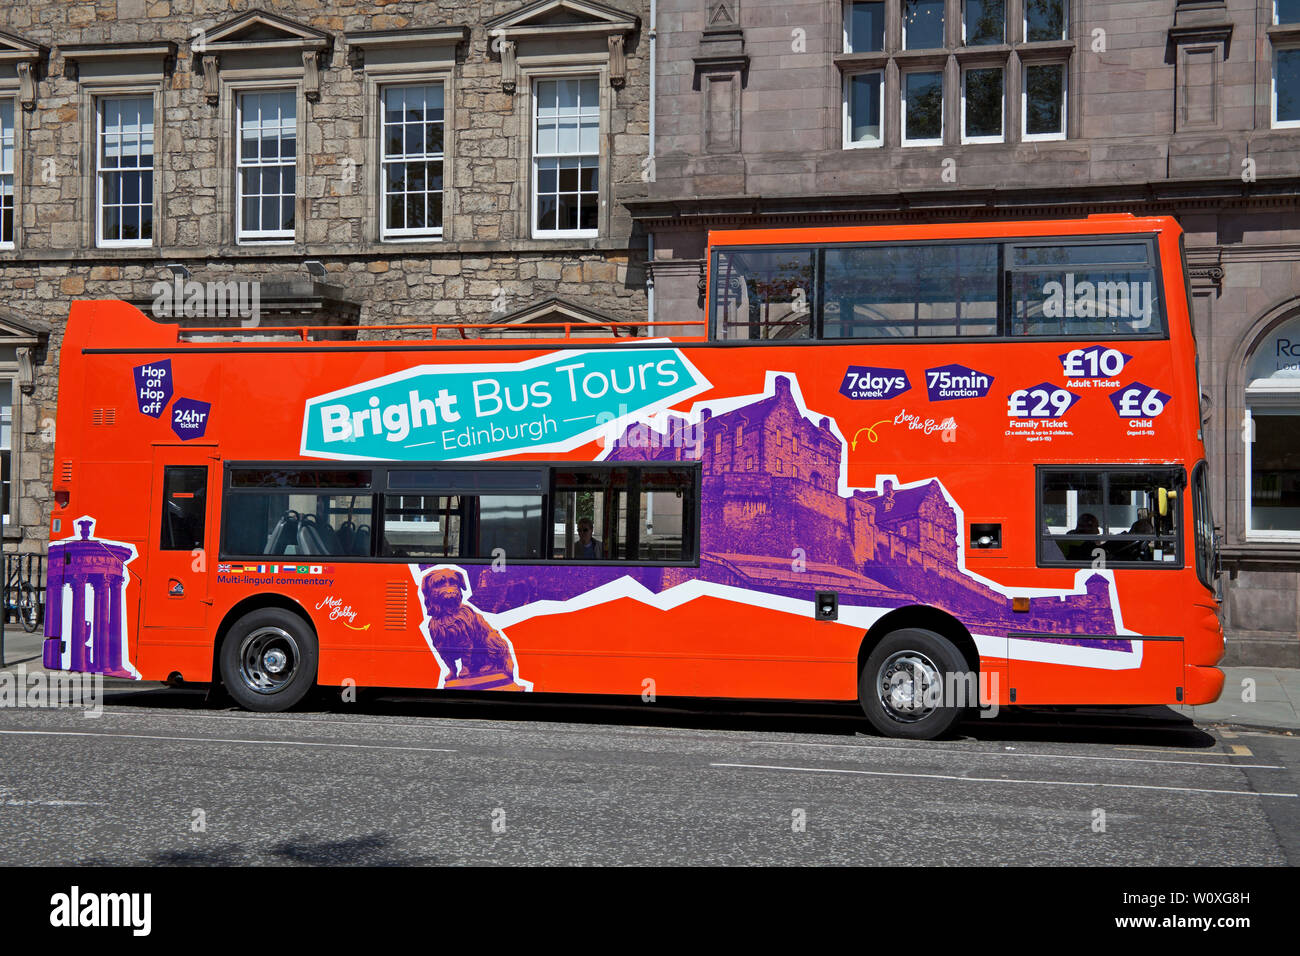 Edinburgh, Scotland. 28th June 2019. Latest bus wars between First Buses and Lothian Buses. First Buses Bright Bus Tours has unveiled its fleet of 14 open-topped double-deckers they are being seen around the city ahead of the launch of the new service on Monday 1st July 2019. The new service undercuts their rivals adults ticket by £4. Stock Photo